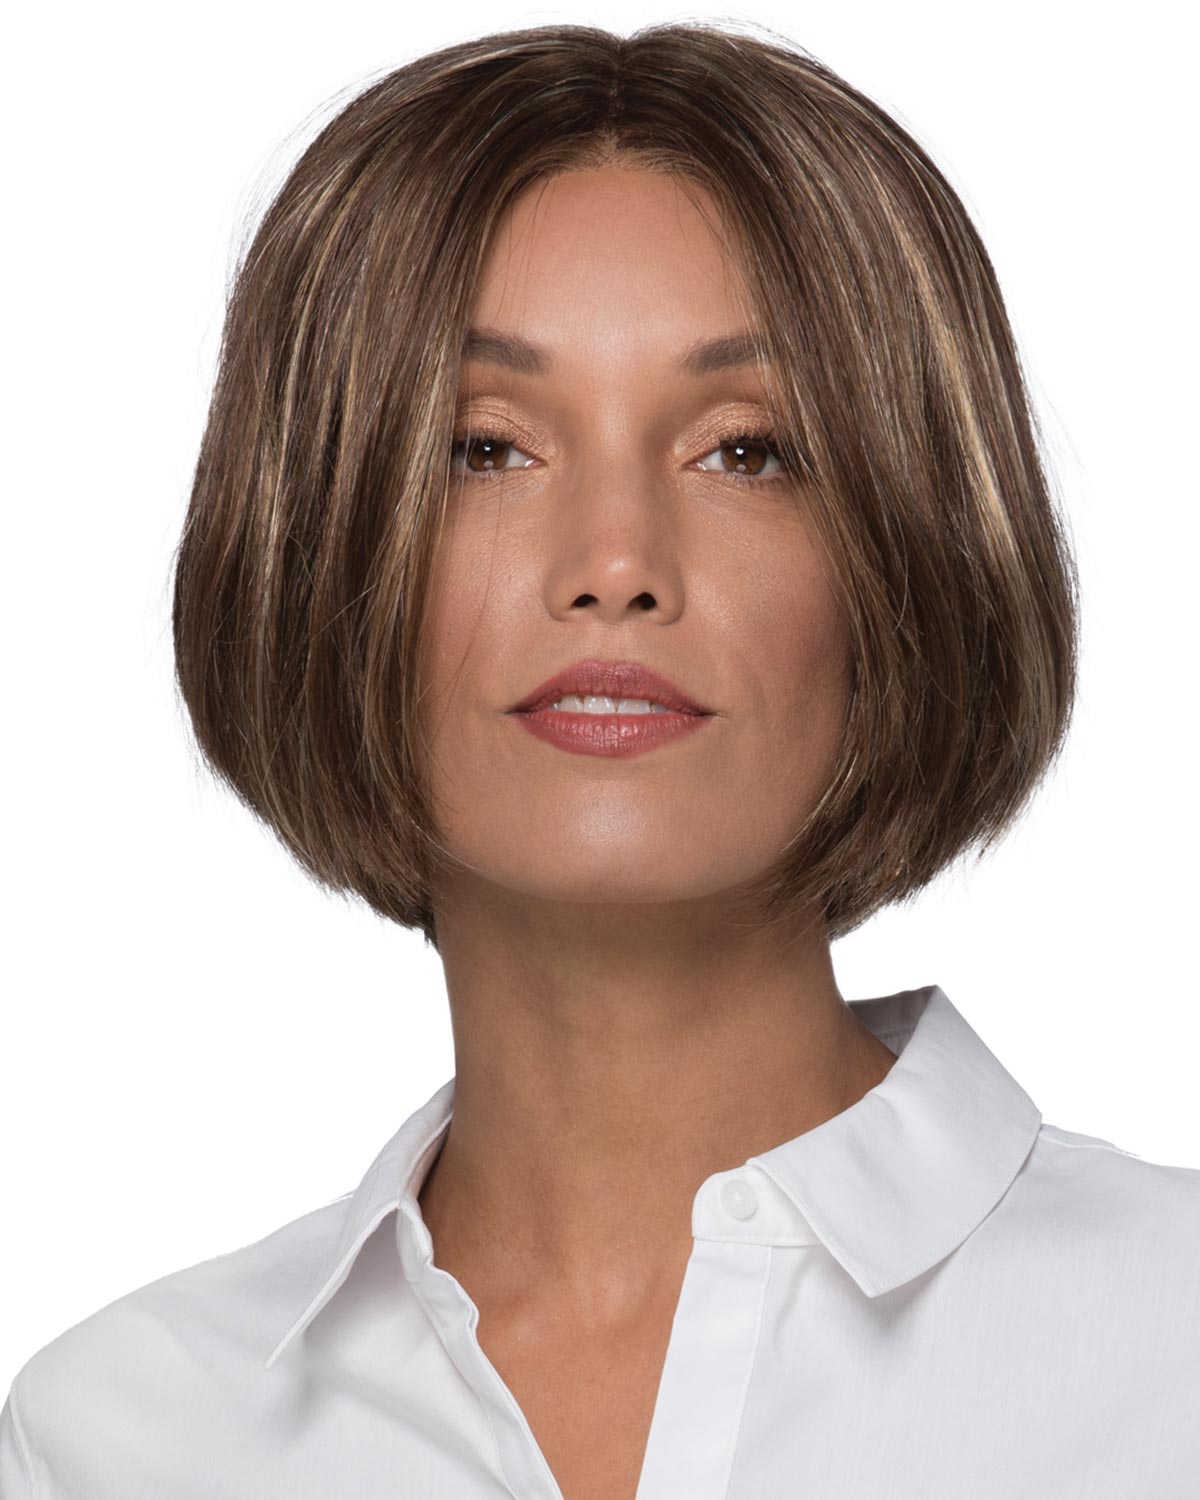 Kennedy | Lace Front & Monofilament Synthetic Wig by Estetica